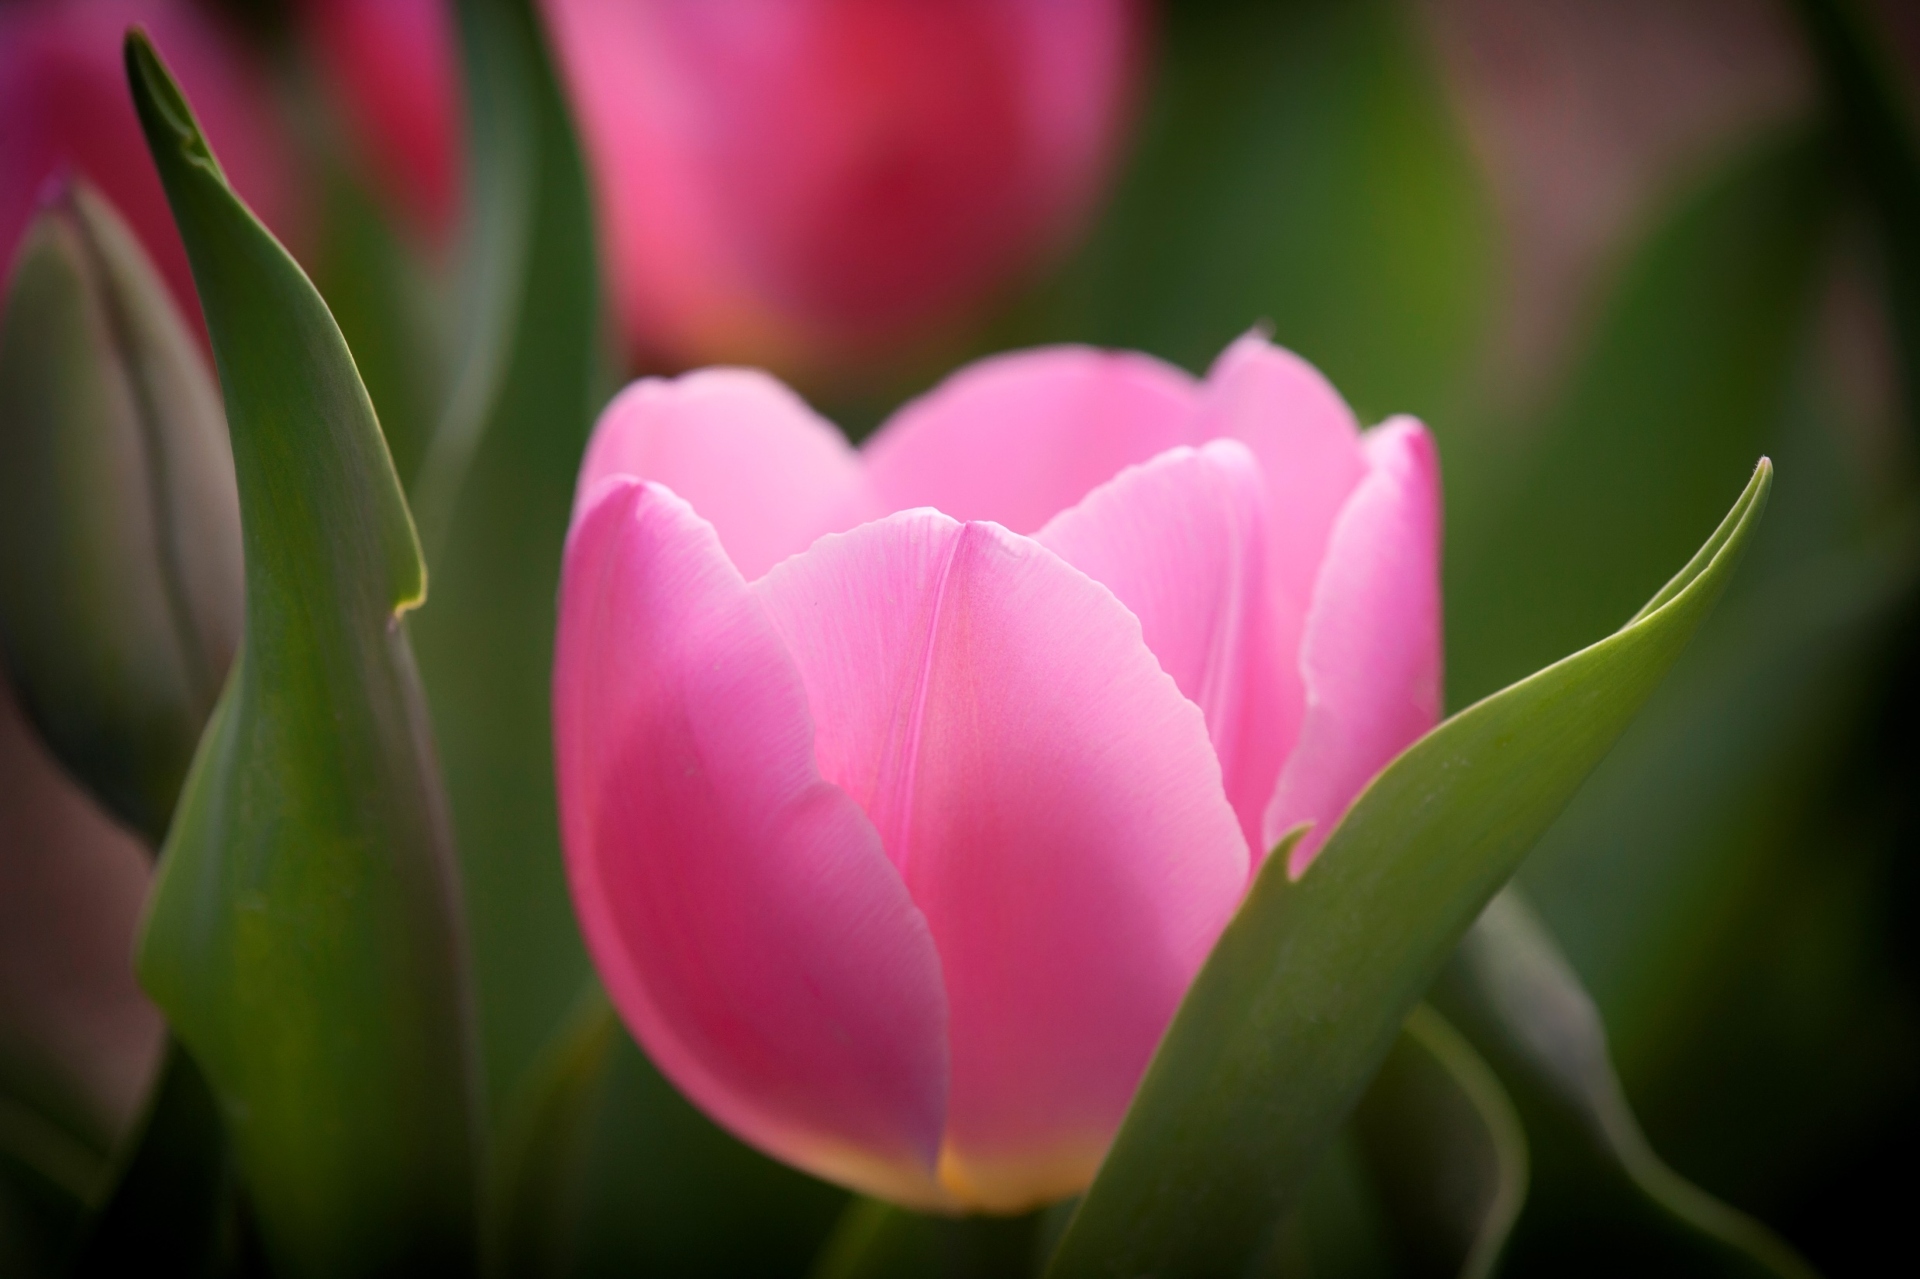 A closeup photo of a pink tulip in bloom.